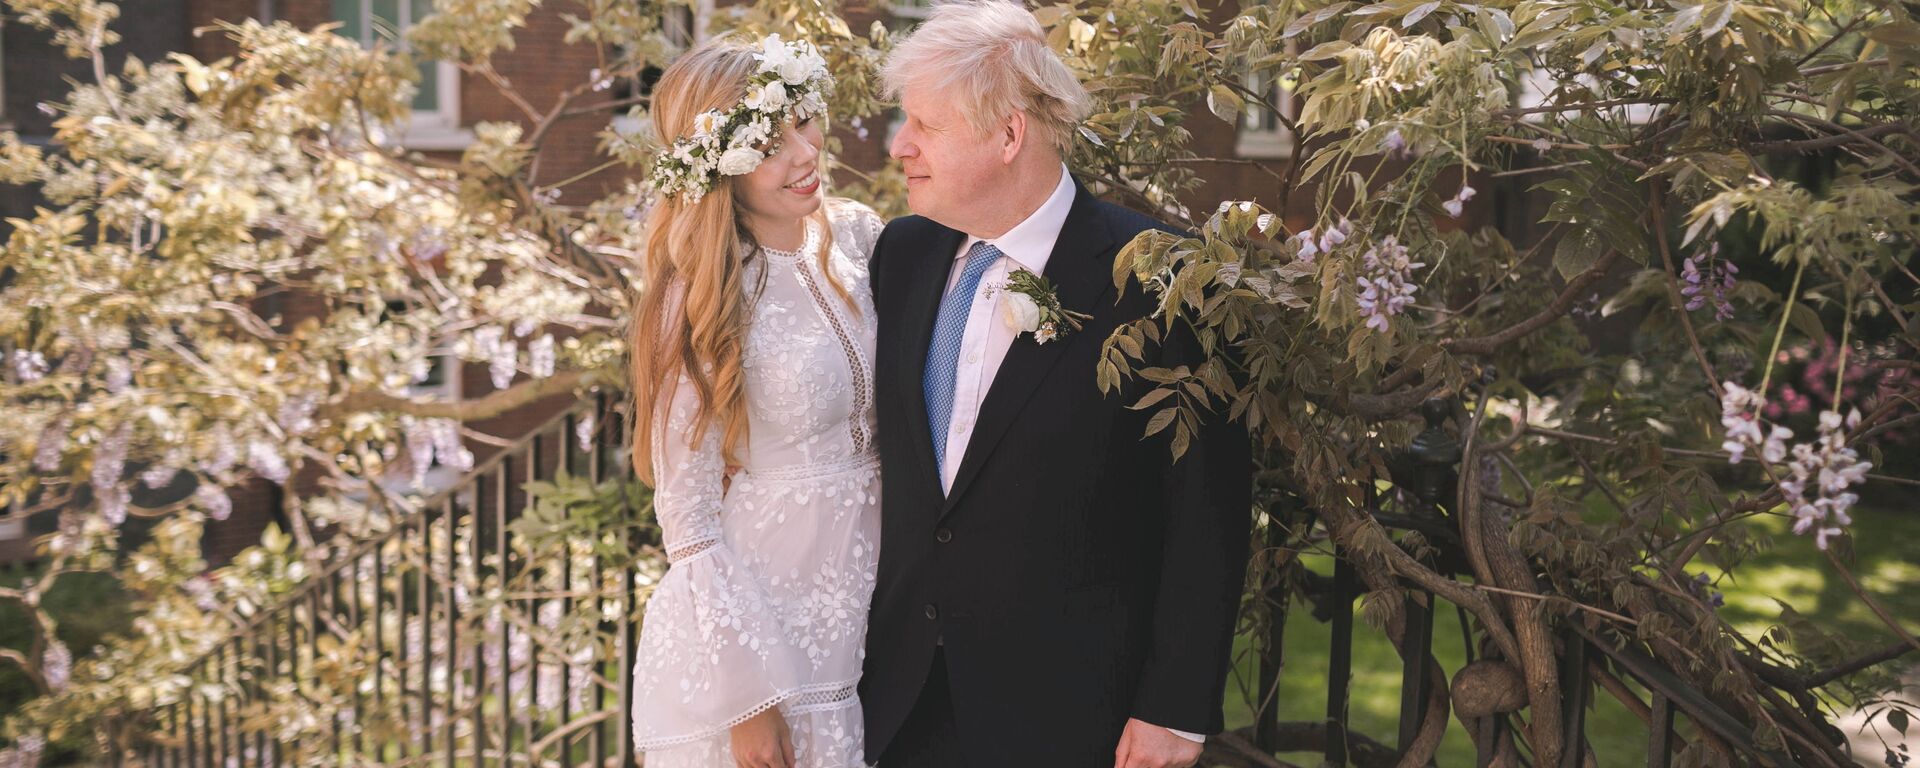 Boris and Carrie Johnson are seen in the garden of 10 Downing Street, after their wedding, in London, Britain May 29, 2021. Picture taken May 29, 2021. Rebecca Fulton/Pool via REUTERS     TPX IMAGES OF THE DAY - Sputnik International, 1920